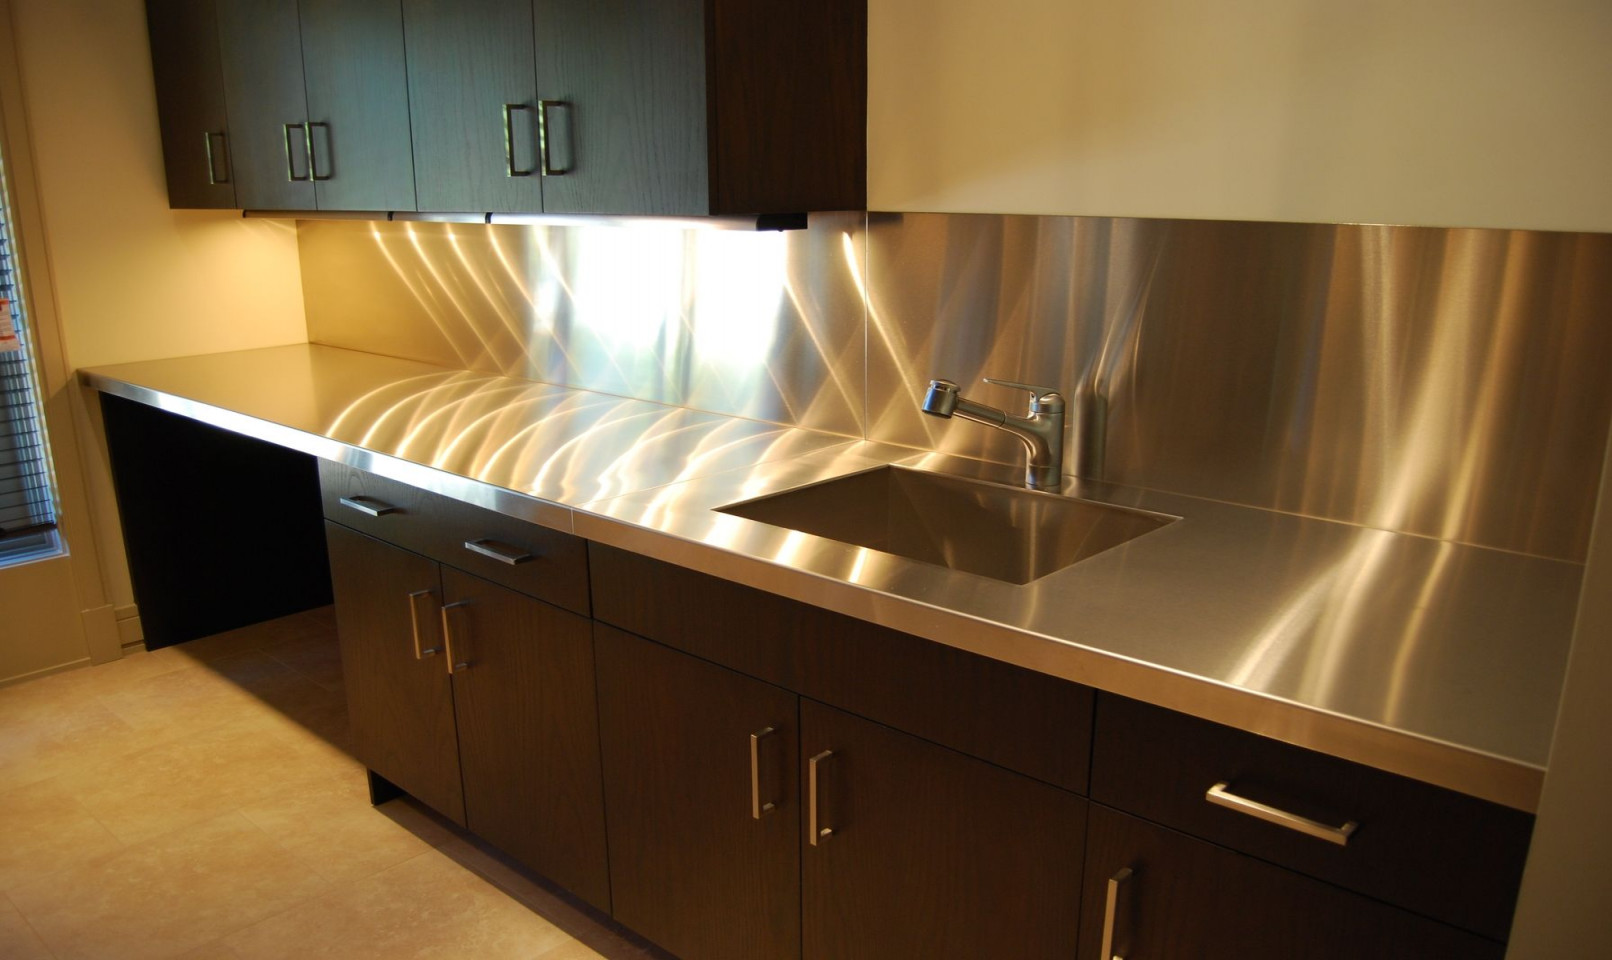 Stainless Steel Countertops  Stainless steel countertops